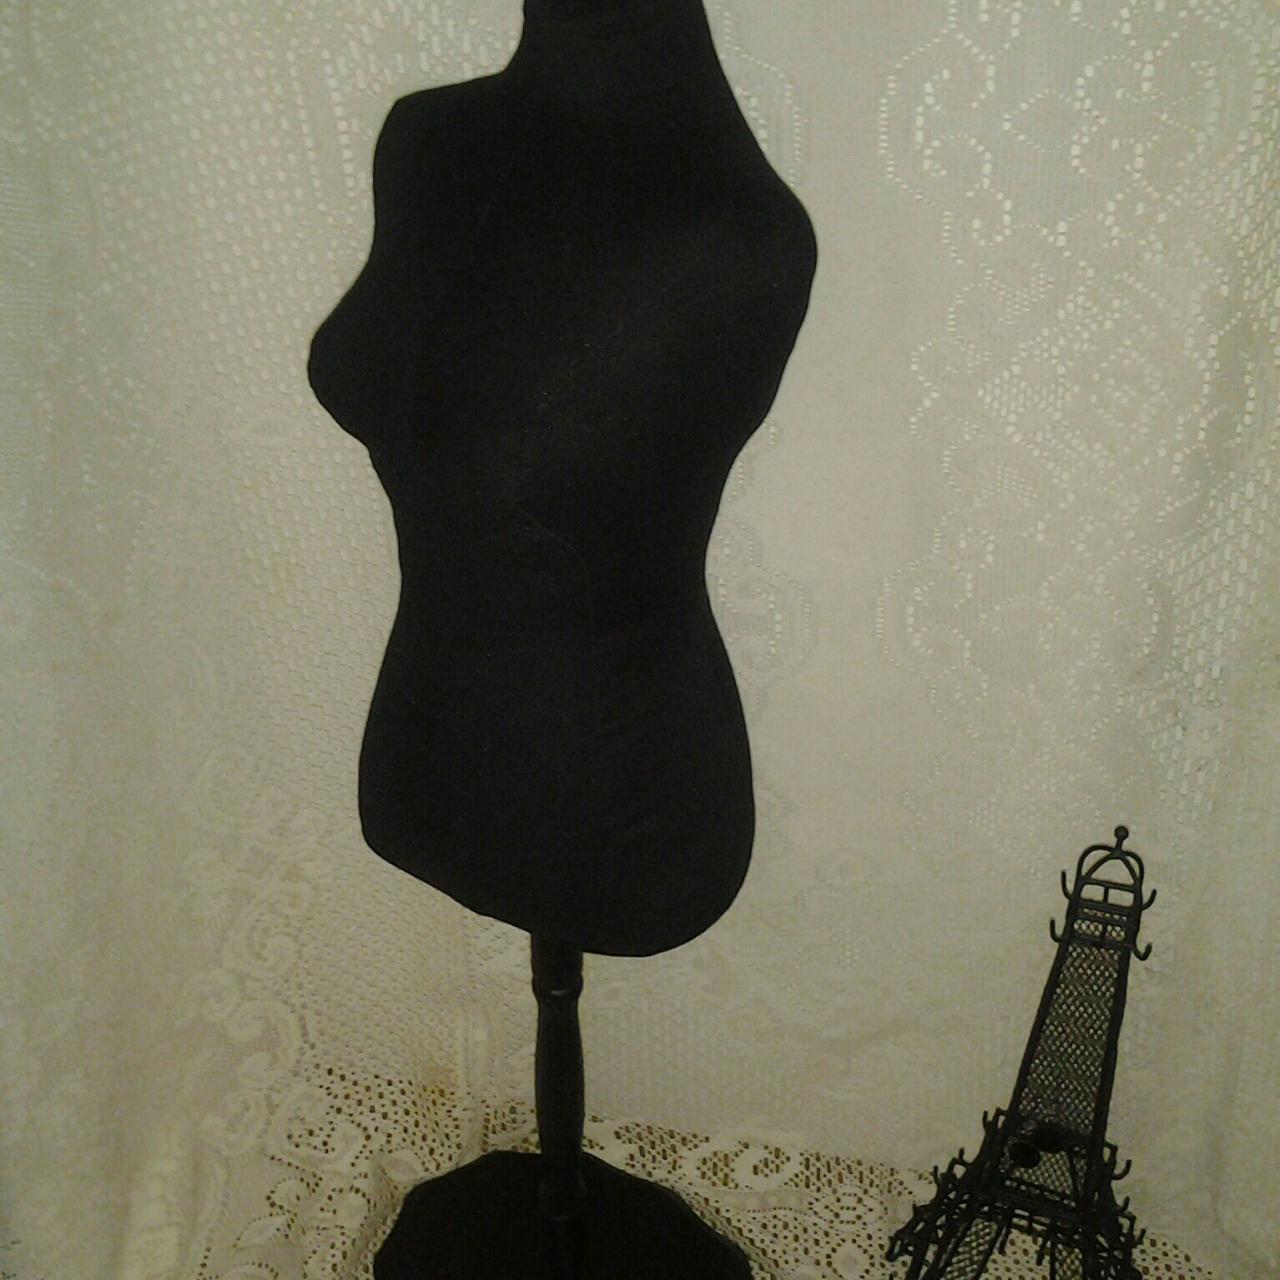 Boutique Dress Form Designs Jewelry Display, 34" Torso Great For Store Front Display Or Home Decor. Black On Black